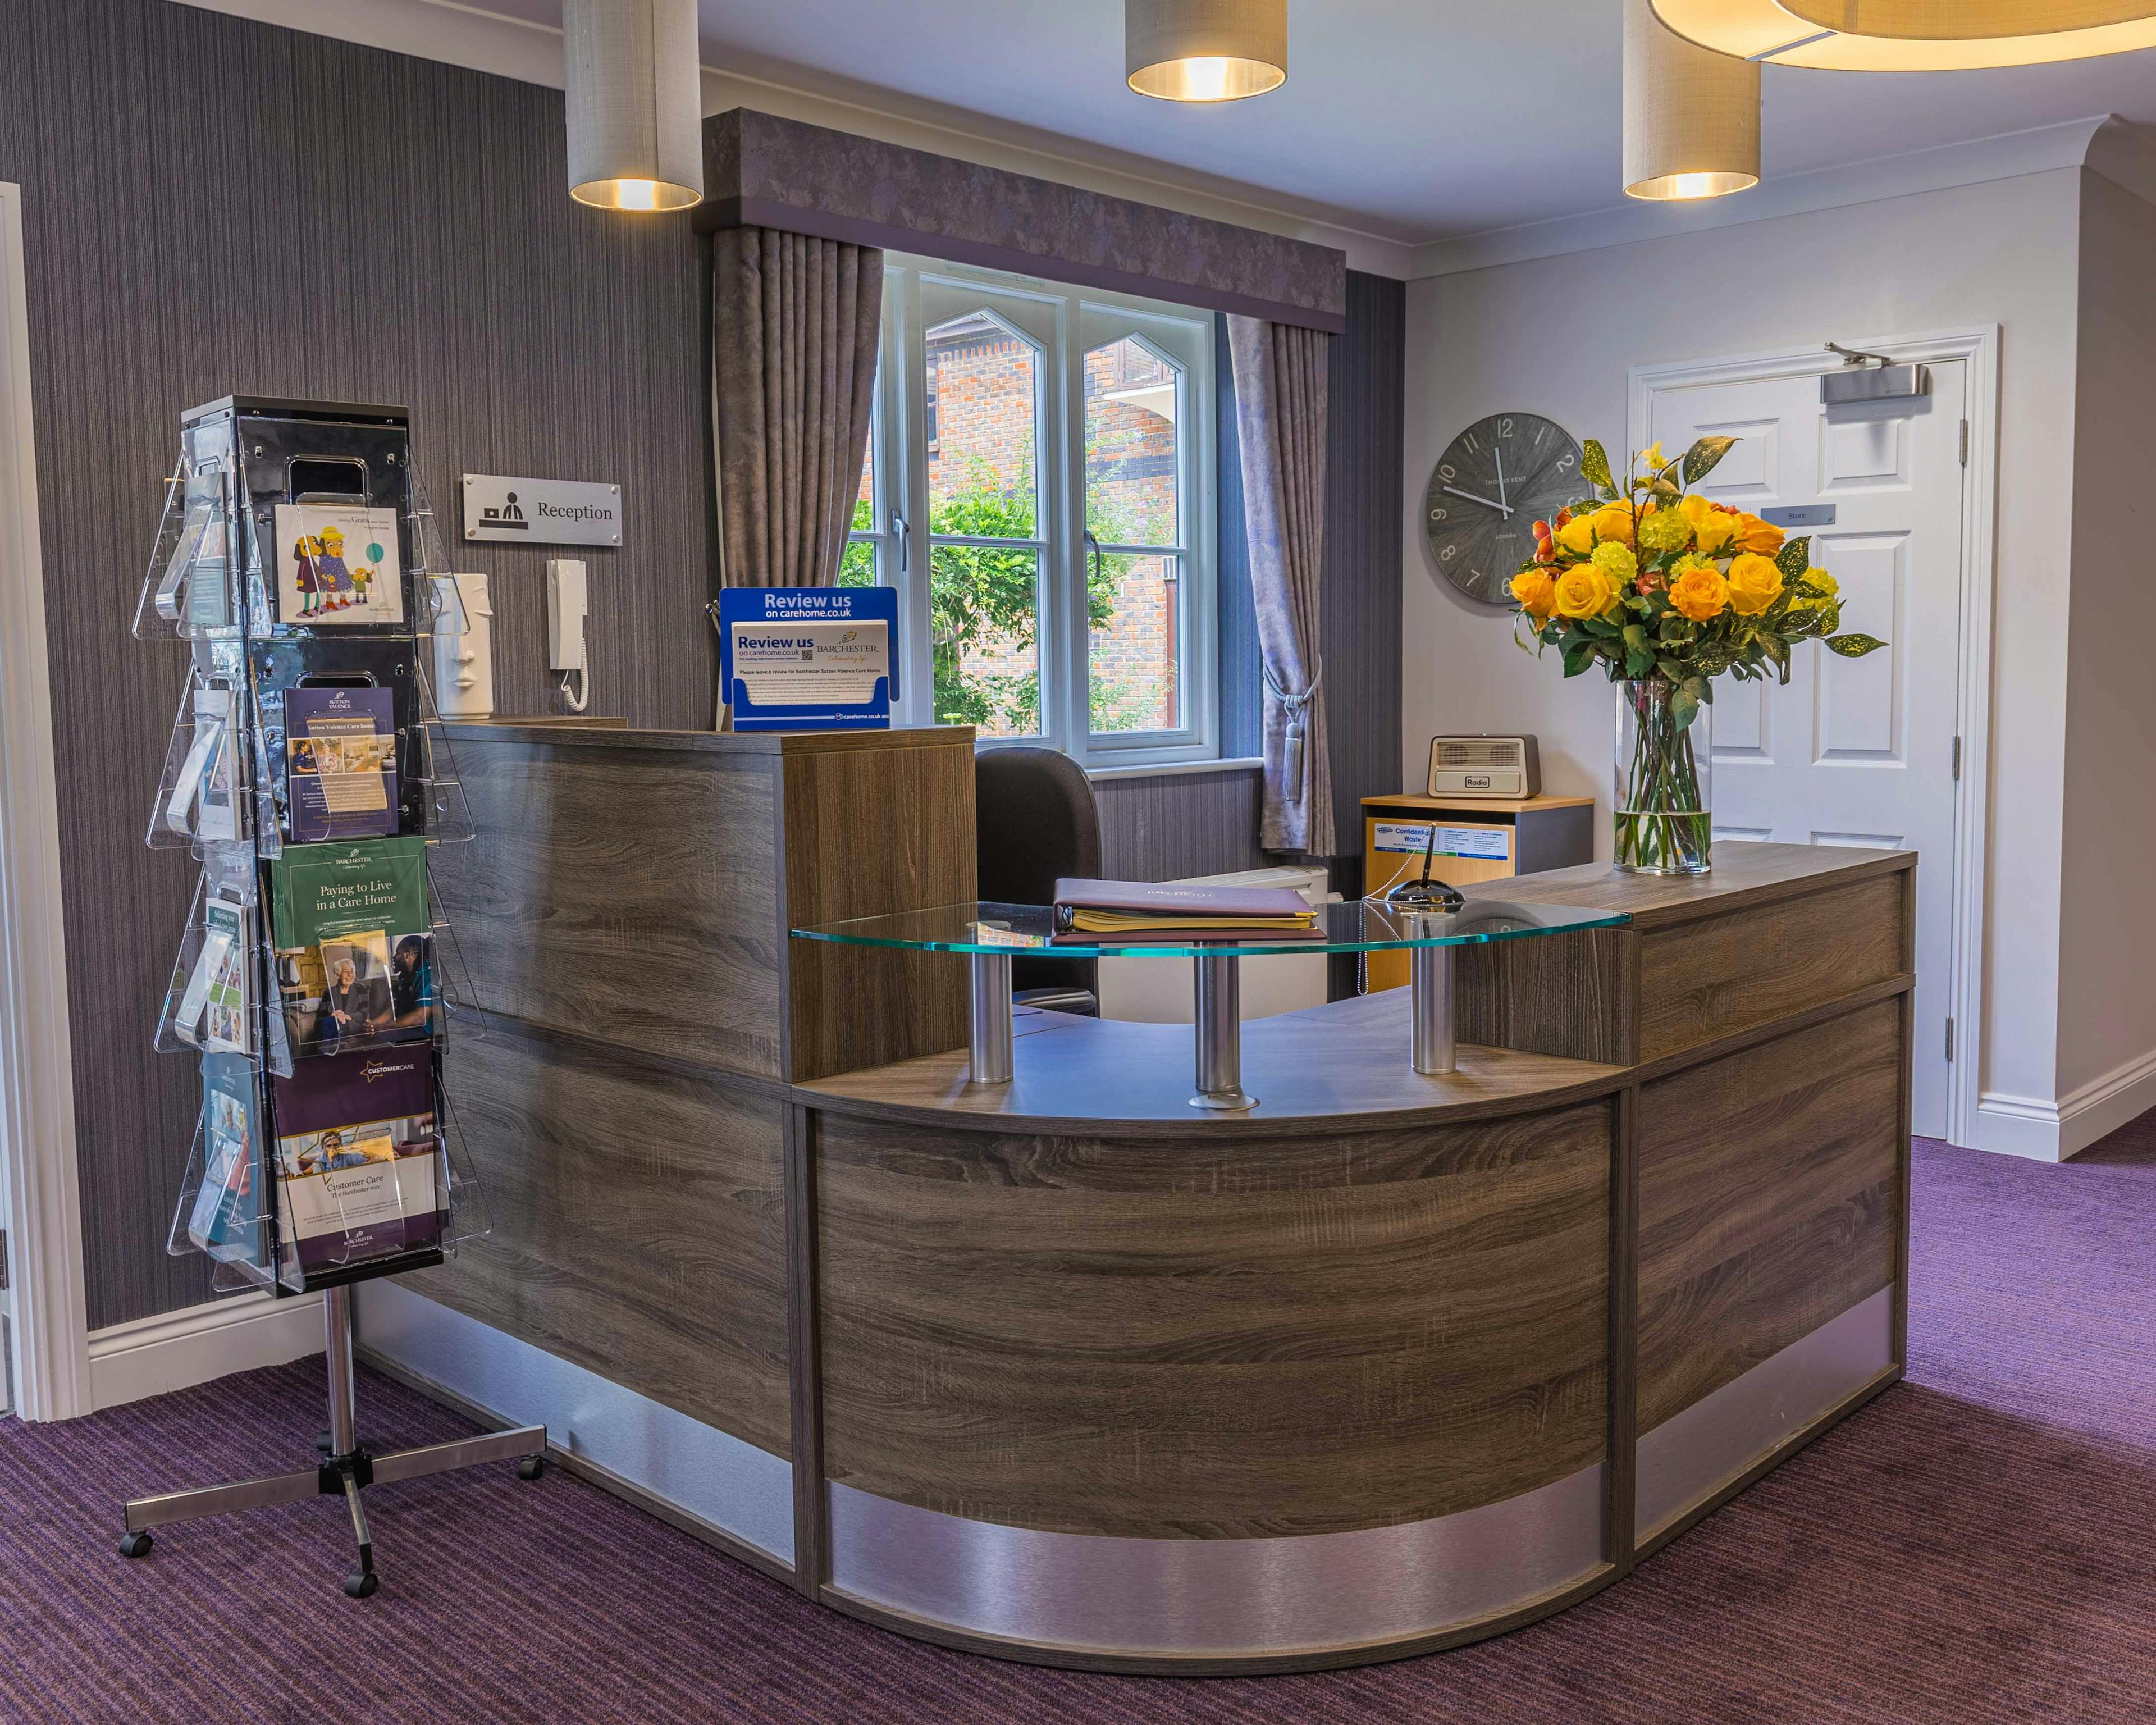 Reception at Sutton Valence Care Home in Maidstone, Kent